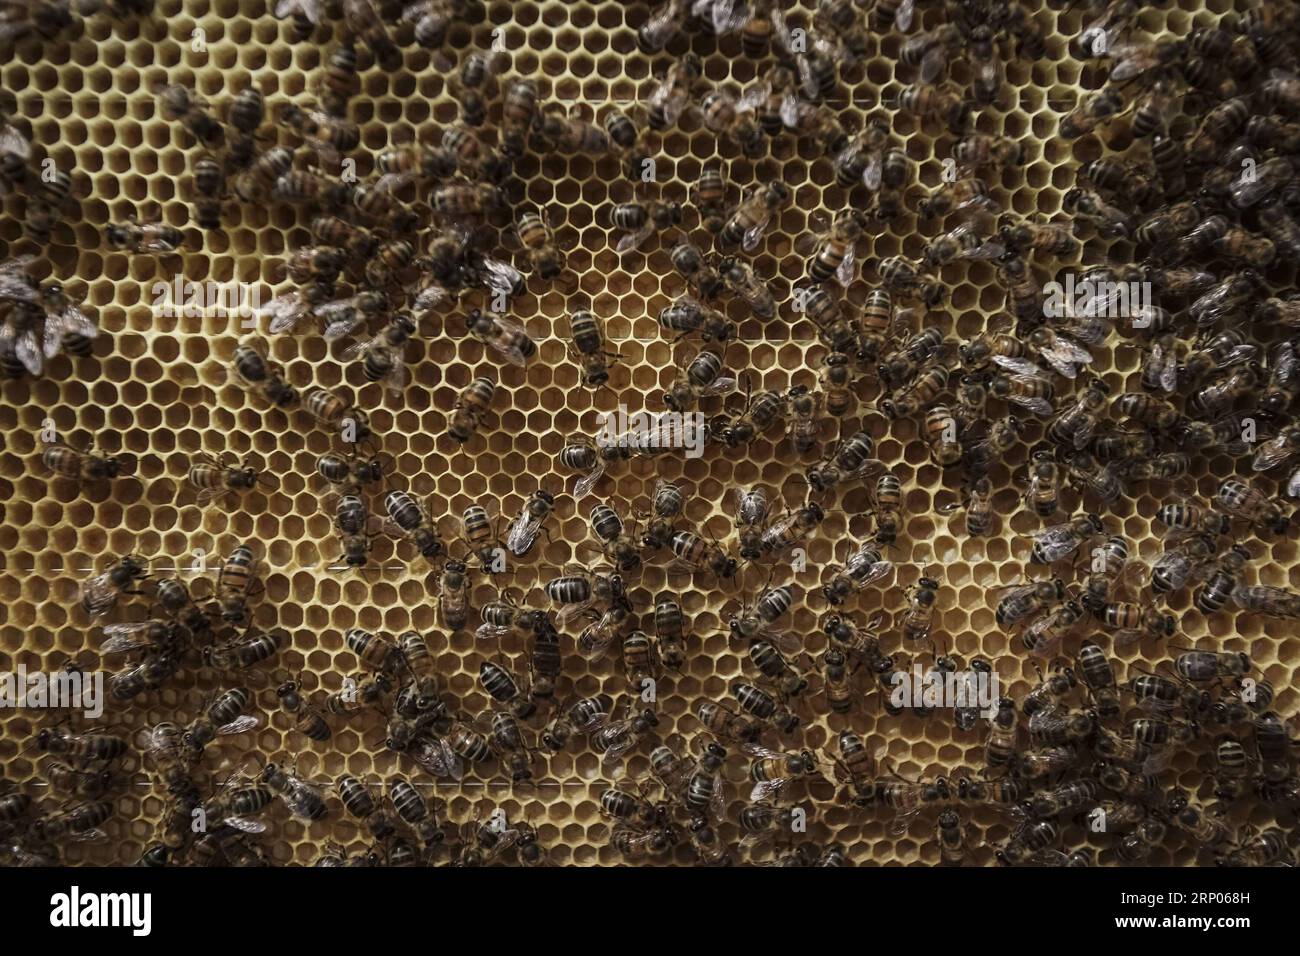 (180422) -- GUASCA, April 22, 2018 -- Image taken on April 18, 2018 shows bees in a hive in the Montiel natural reserve of Guasca in Colombia. ) (cr) (vf) COLOMBIA-GUASCA-BEEKEEPING-EARTH DAY JHONxPAZ PUBLICATIONxNOTxINxCHN Stock Photo